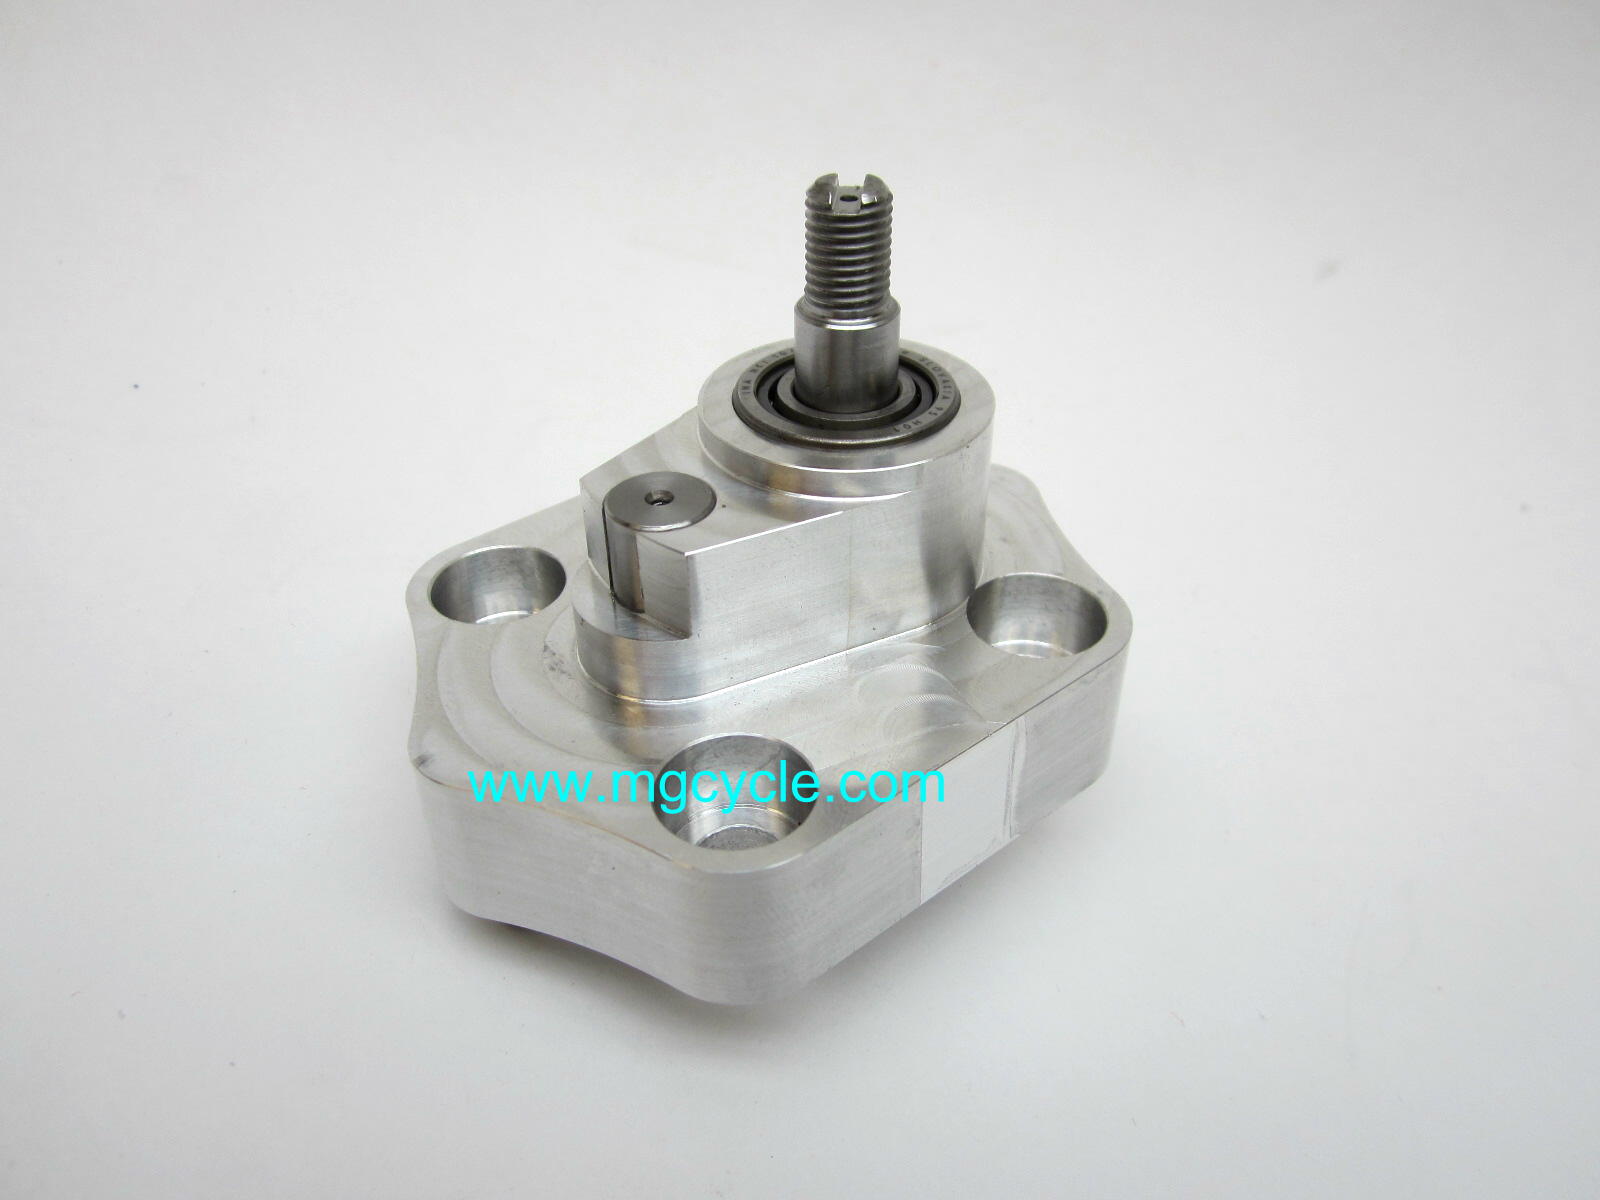 Improved oil pump for two valve big twins, chain driven oil pump